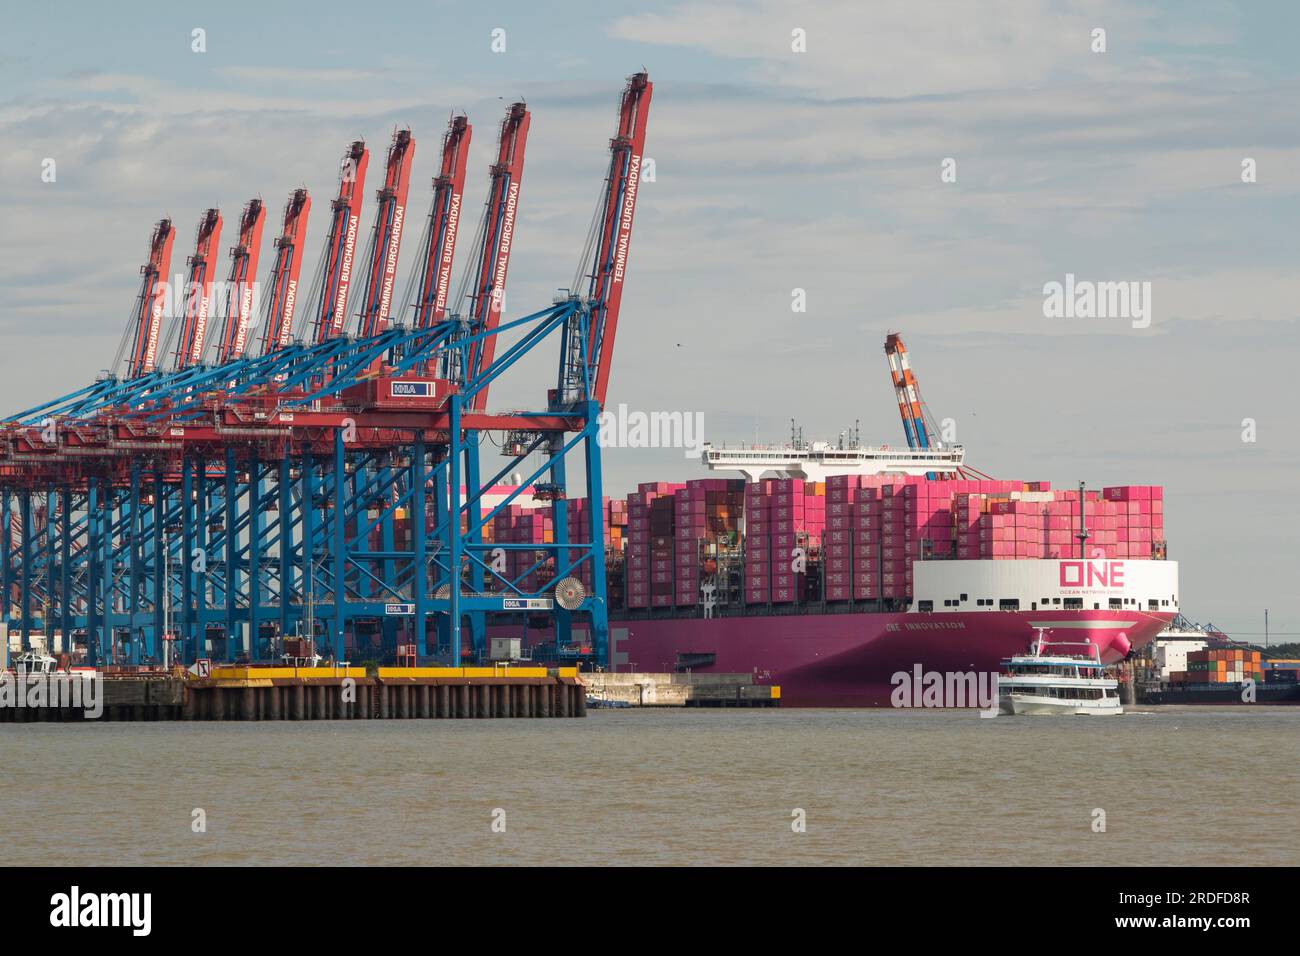 https://c8.alamy.com/comp/2RDFD8R/pink-container-freighter-one-innovation-of-the-shipping-company-ocean-network-express-europe-ltd-on-the-elbe-while-mooring-at-burchardkai-in-the-2RDFD8R.jpg